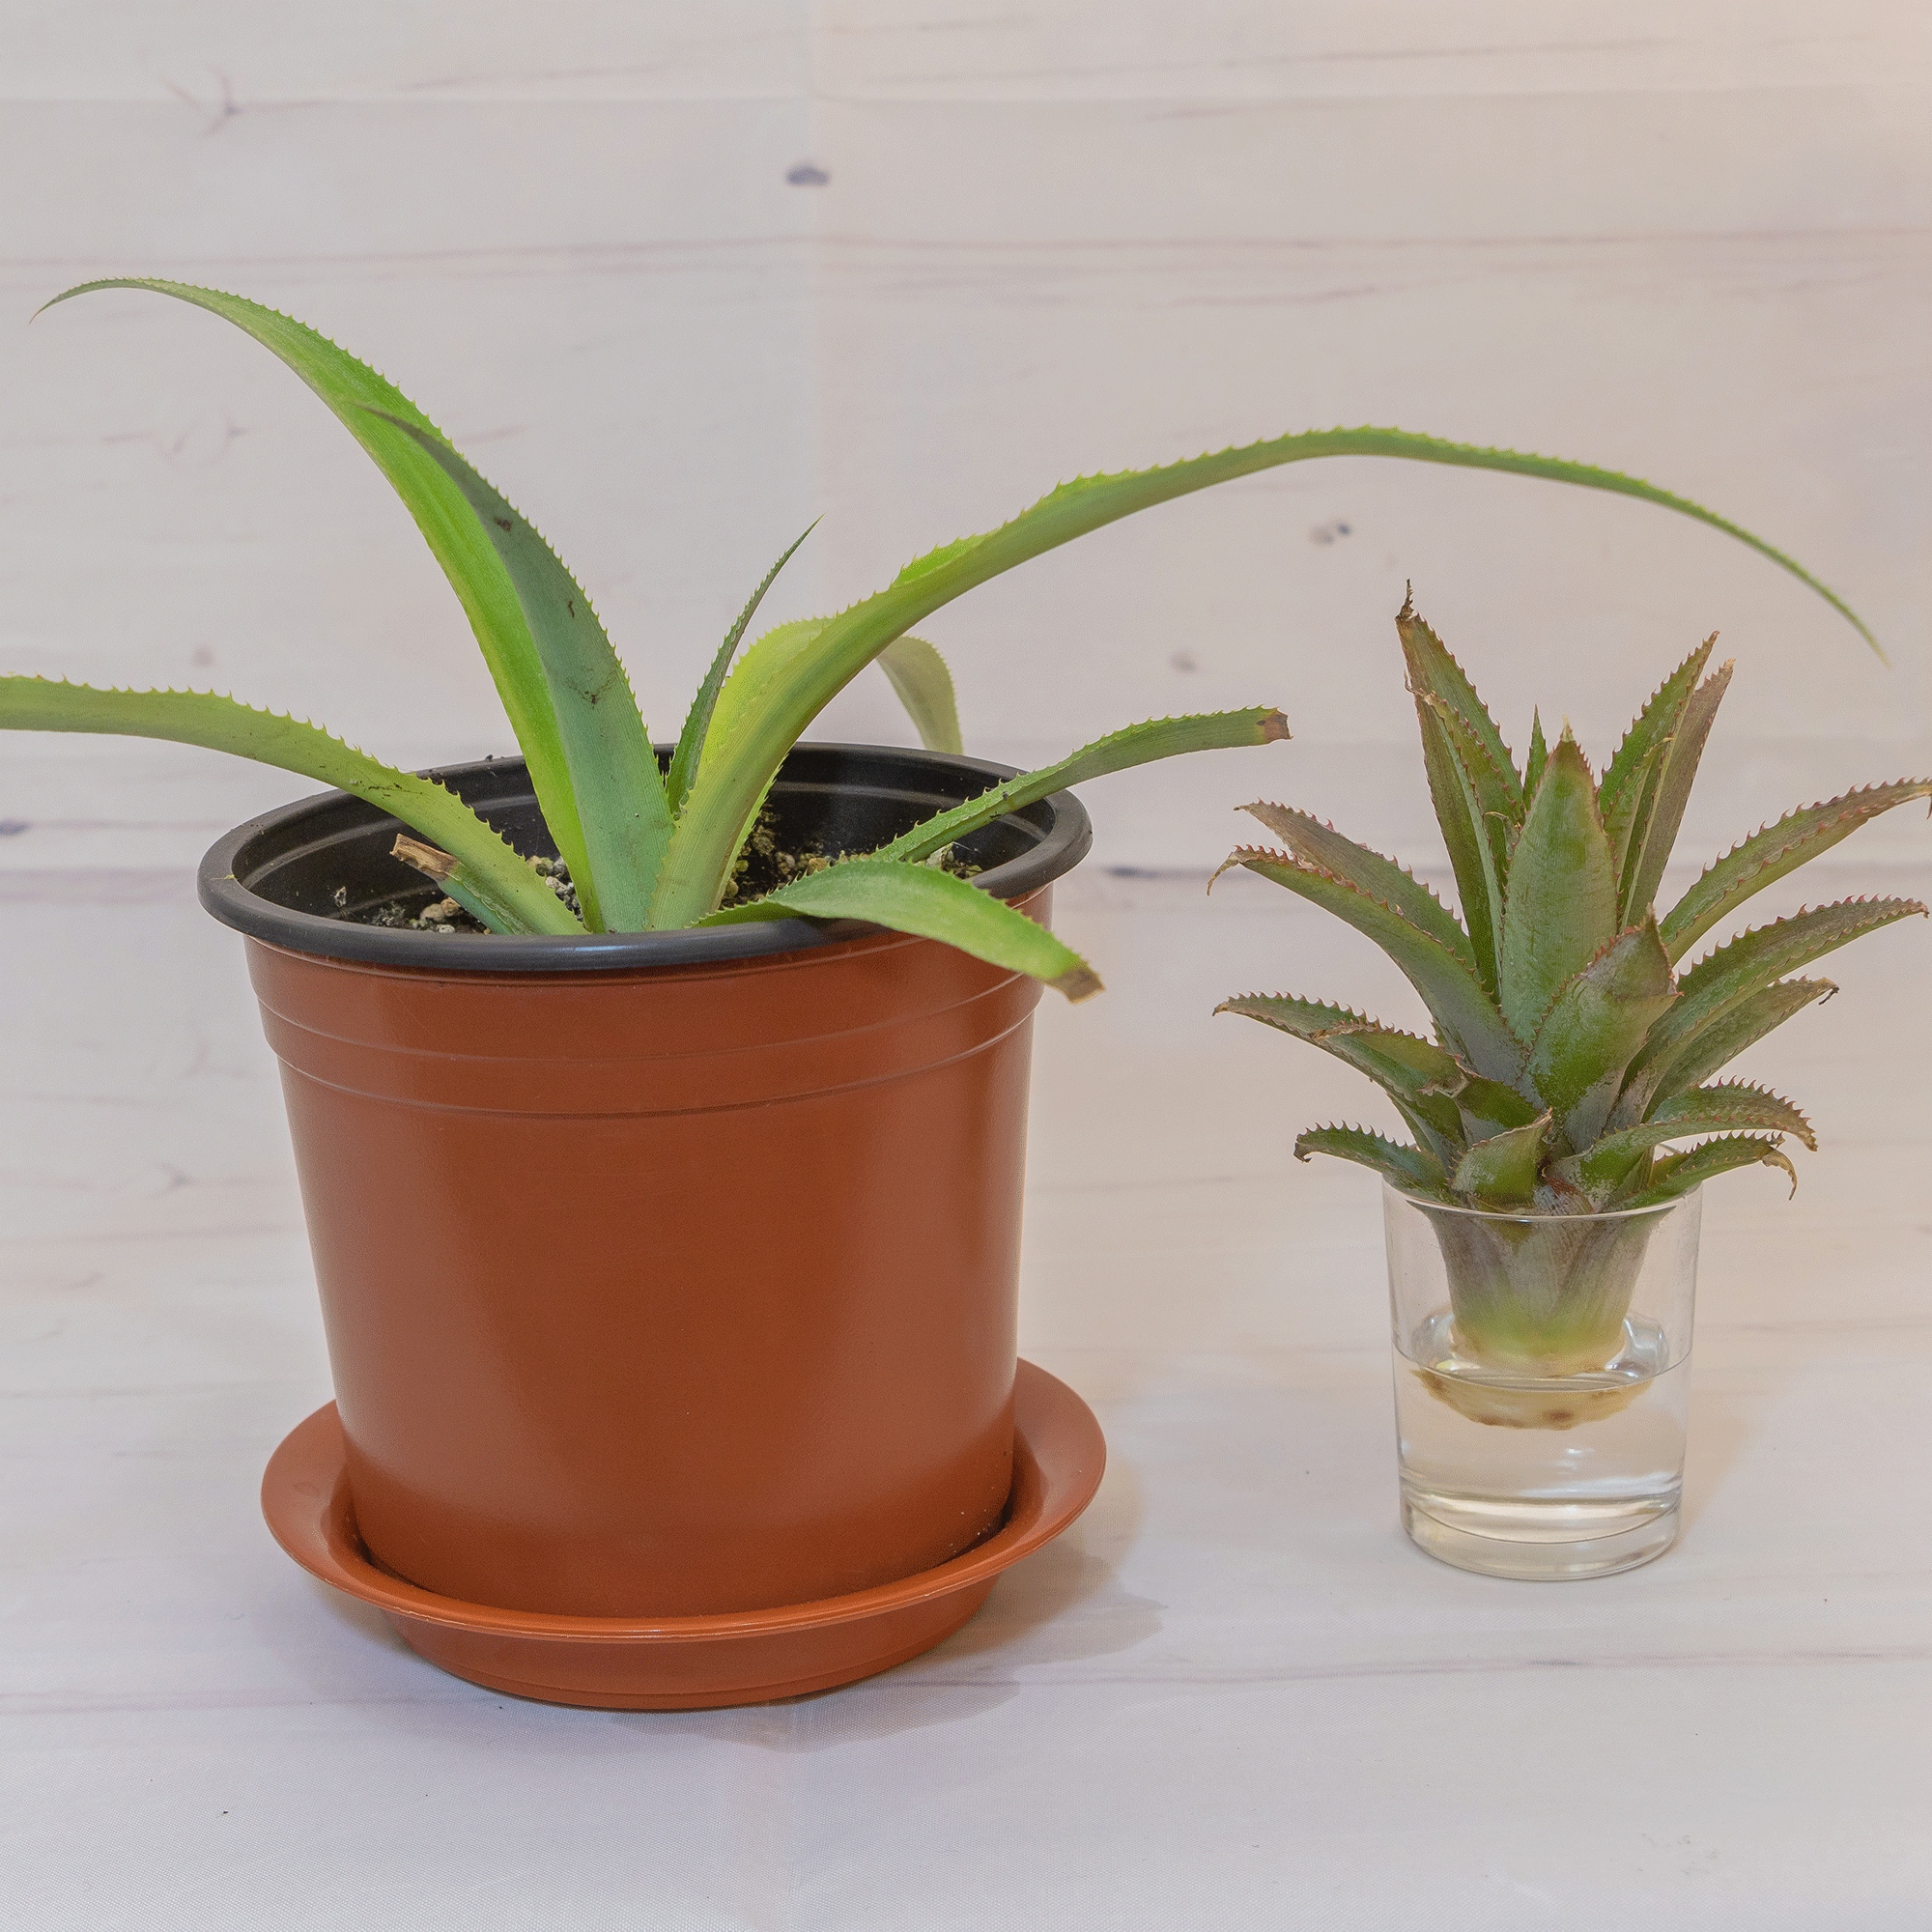 Pineapple growing in pot with pineapple pot in water